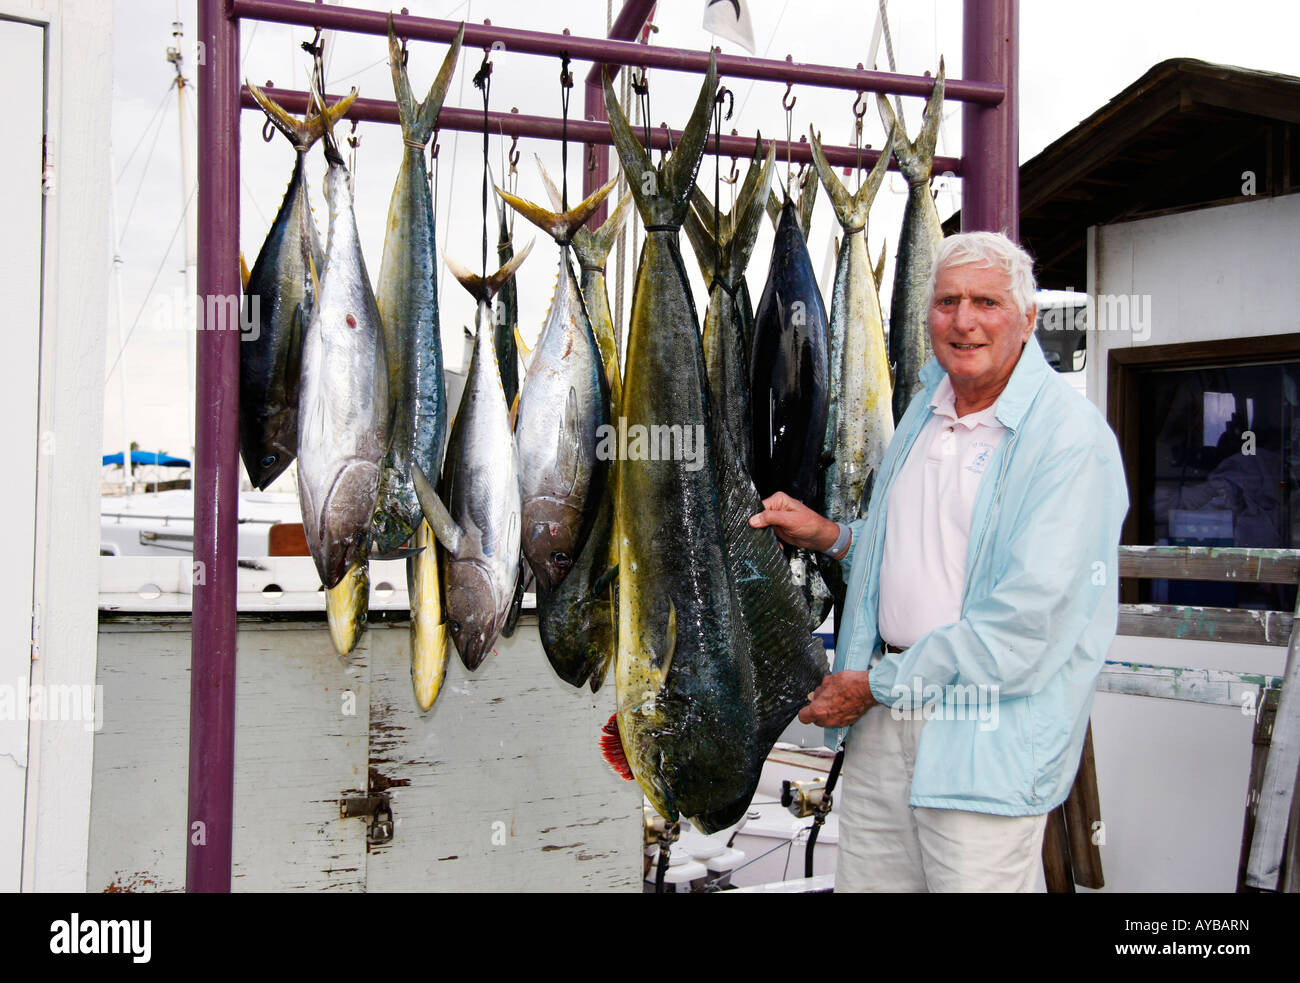 DEEP SEA FISHING IS A POPULAR SPORT WITH TOURISTS AND